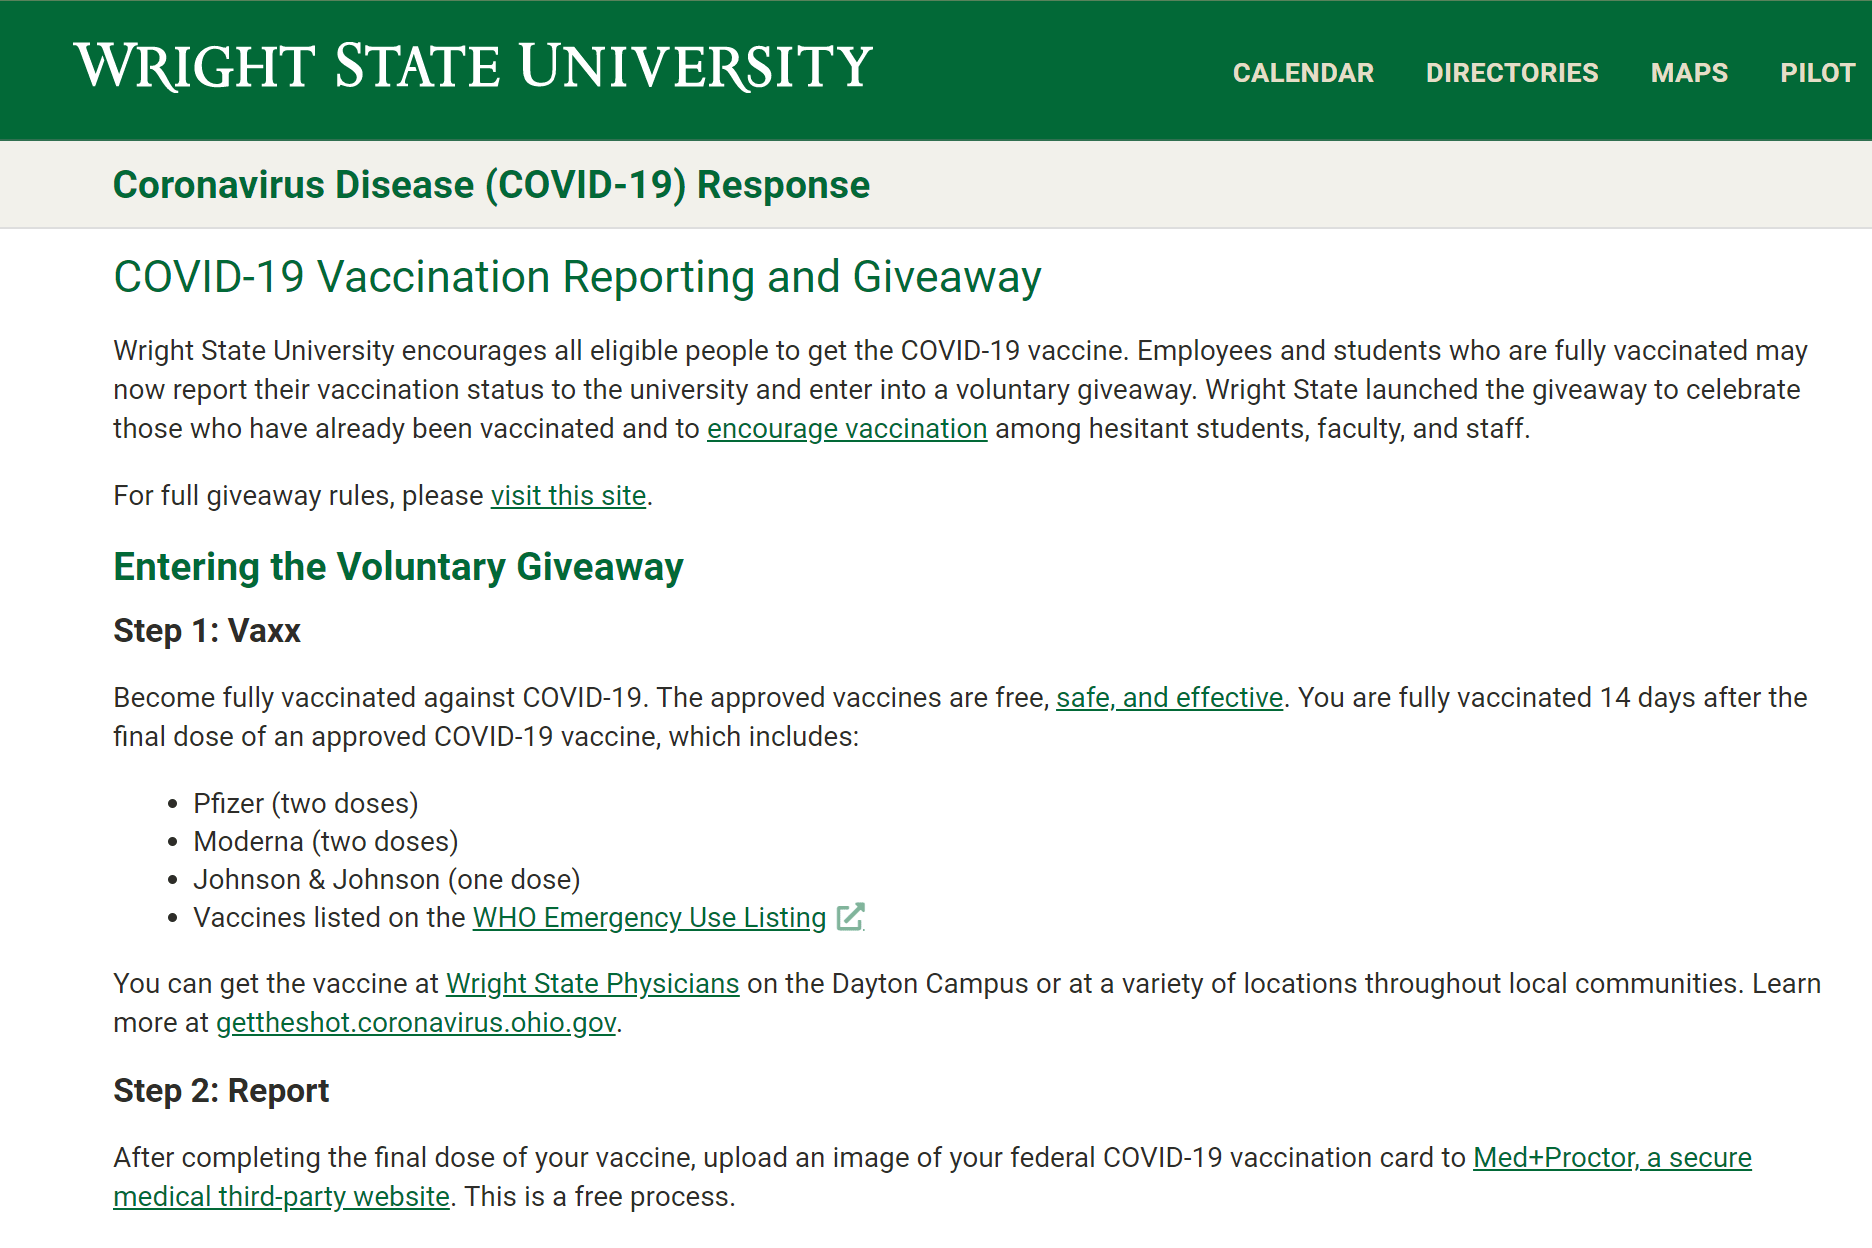 WSU COVID-19 Reporting and Giveaway webpage